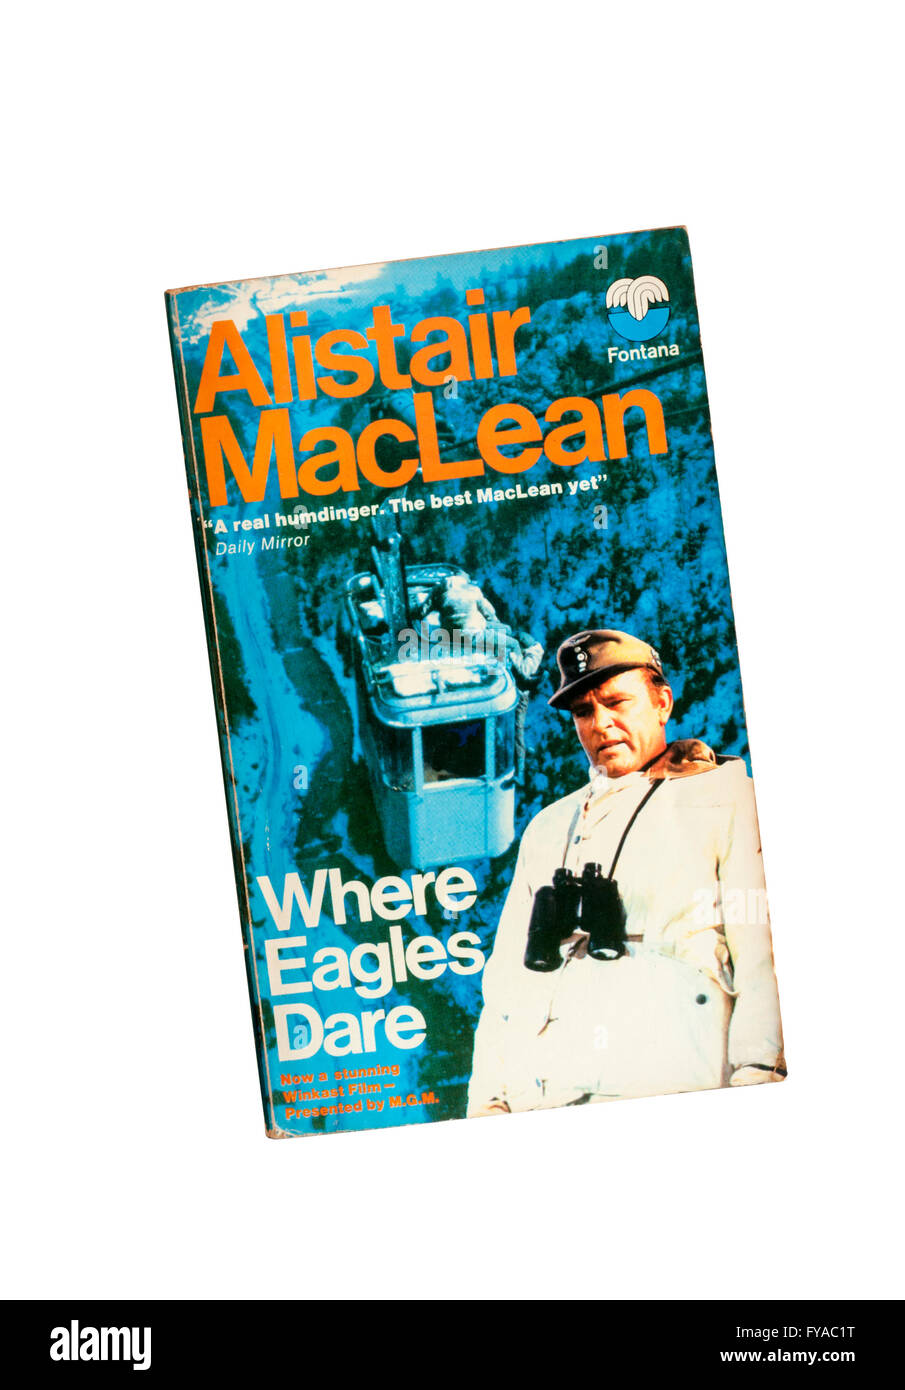 Copy of Where Eagles Dare. Written by Alistair MacLean in 1968, at the same time as the screenplay for the film of the same name Stock Photo